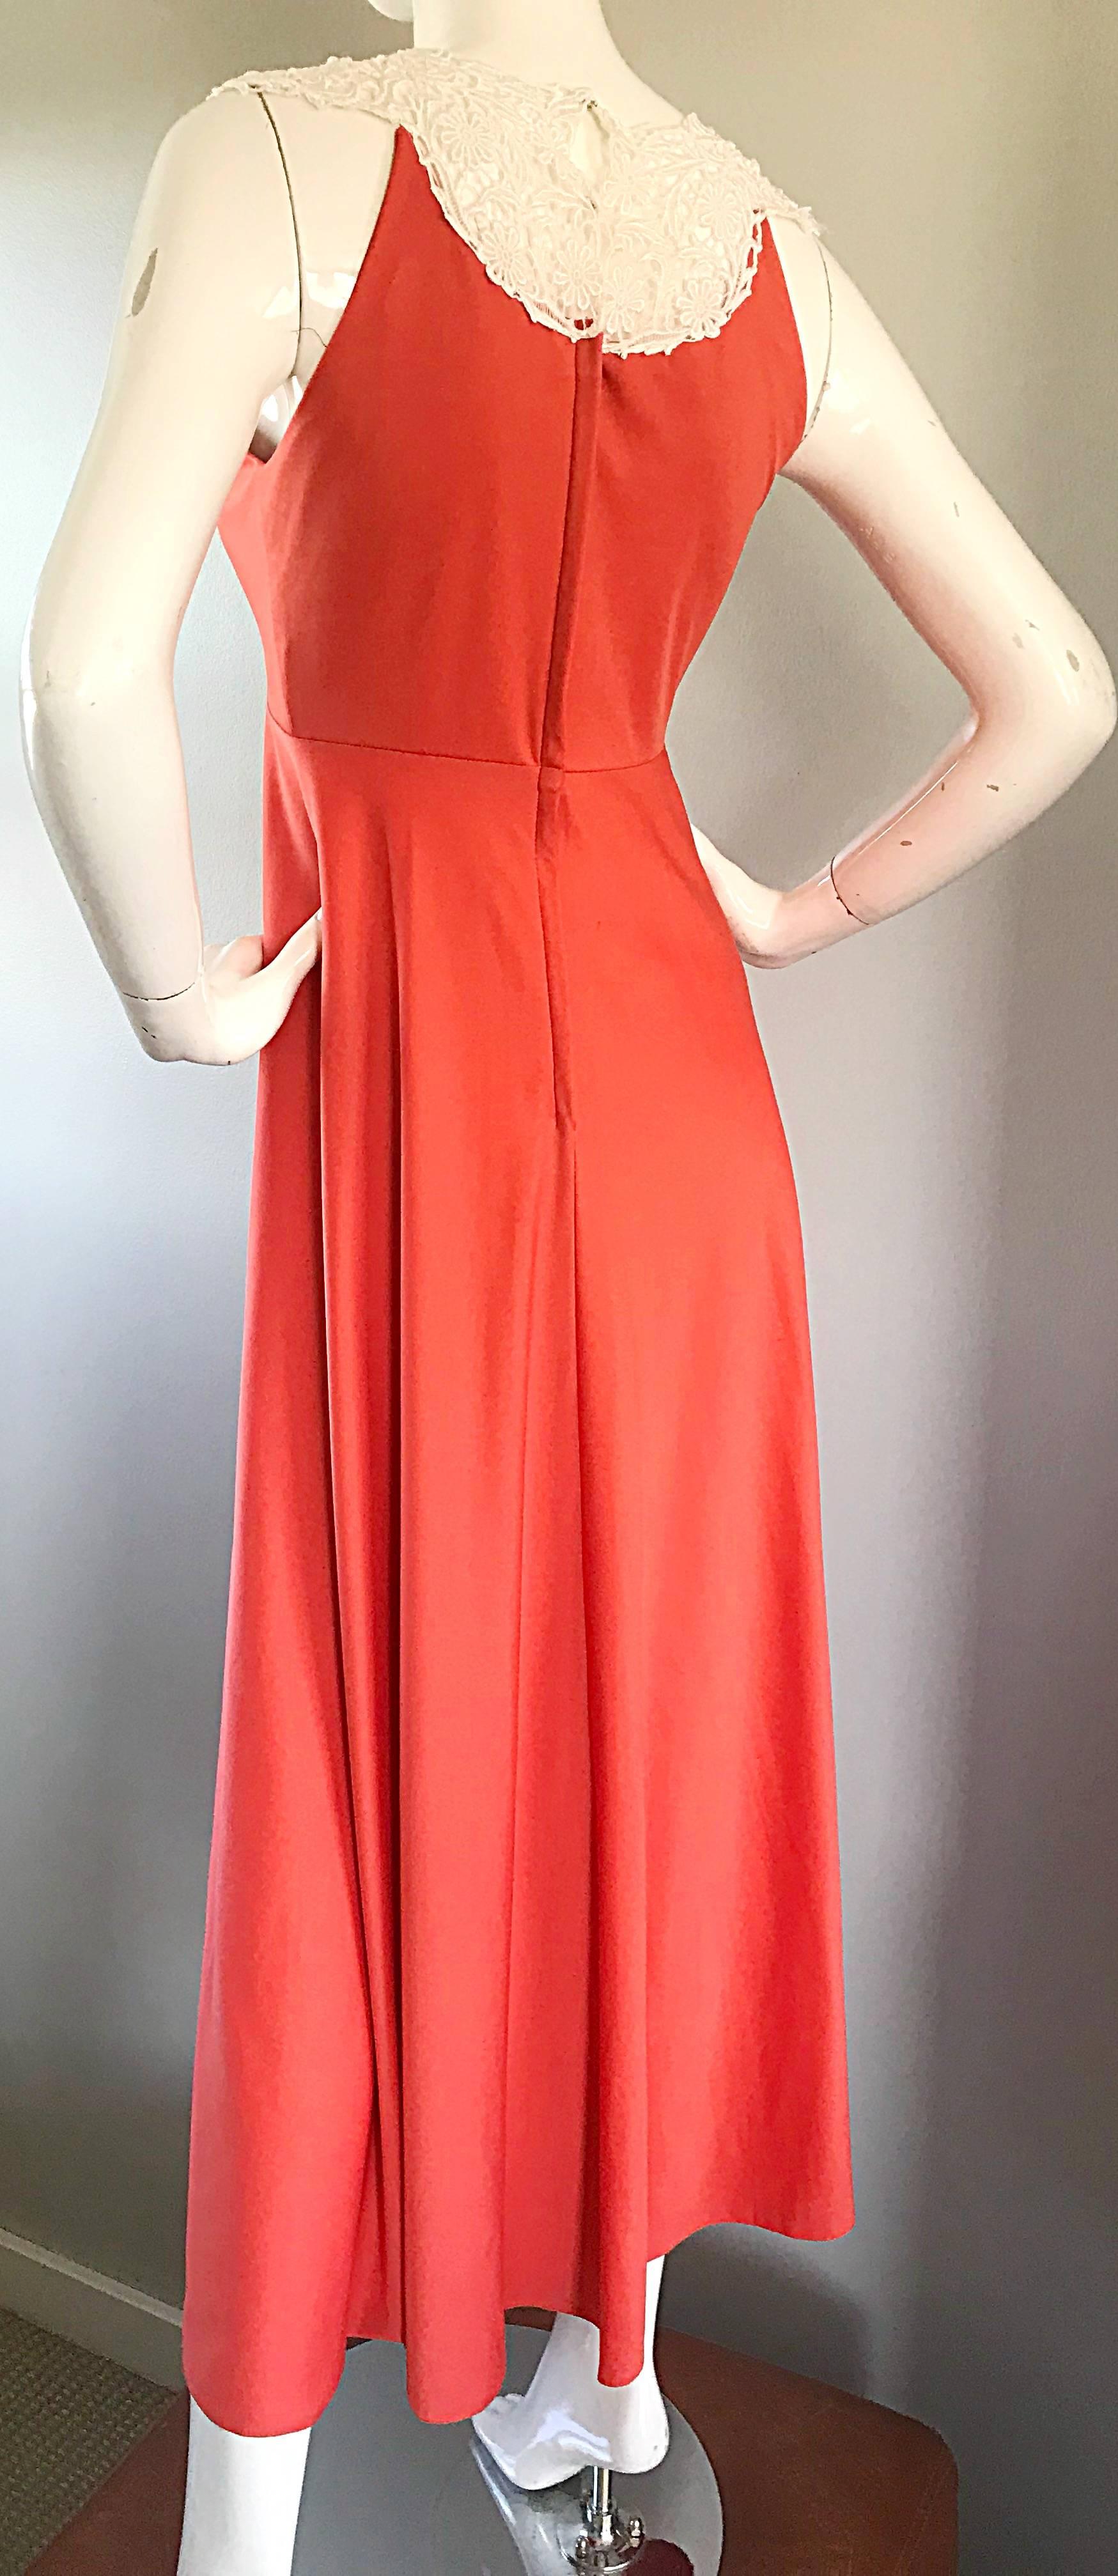 1970s Coral Salmon Pink Jersey + Crochet Lace Collar 70s Vintage Maxi Dress For Sale 3